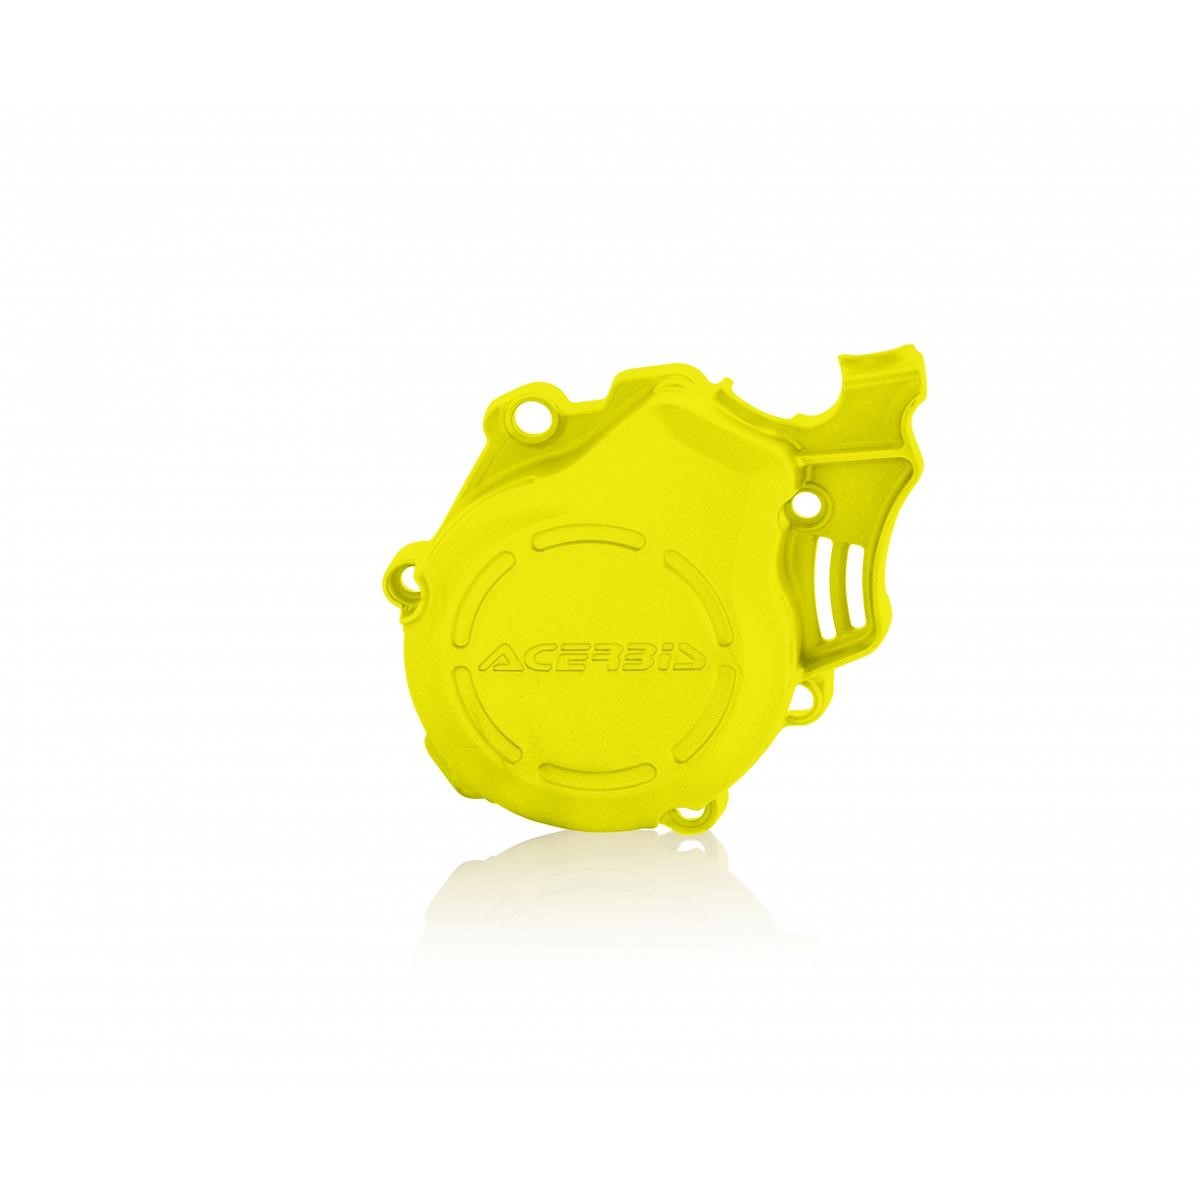 Acerbis Ignition cover protector X-Power KTM SX-F/EXC-F 450, Husqvarna FC/FE 450, yellow